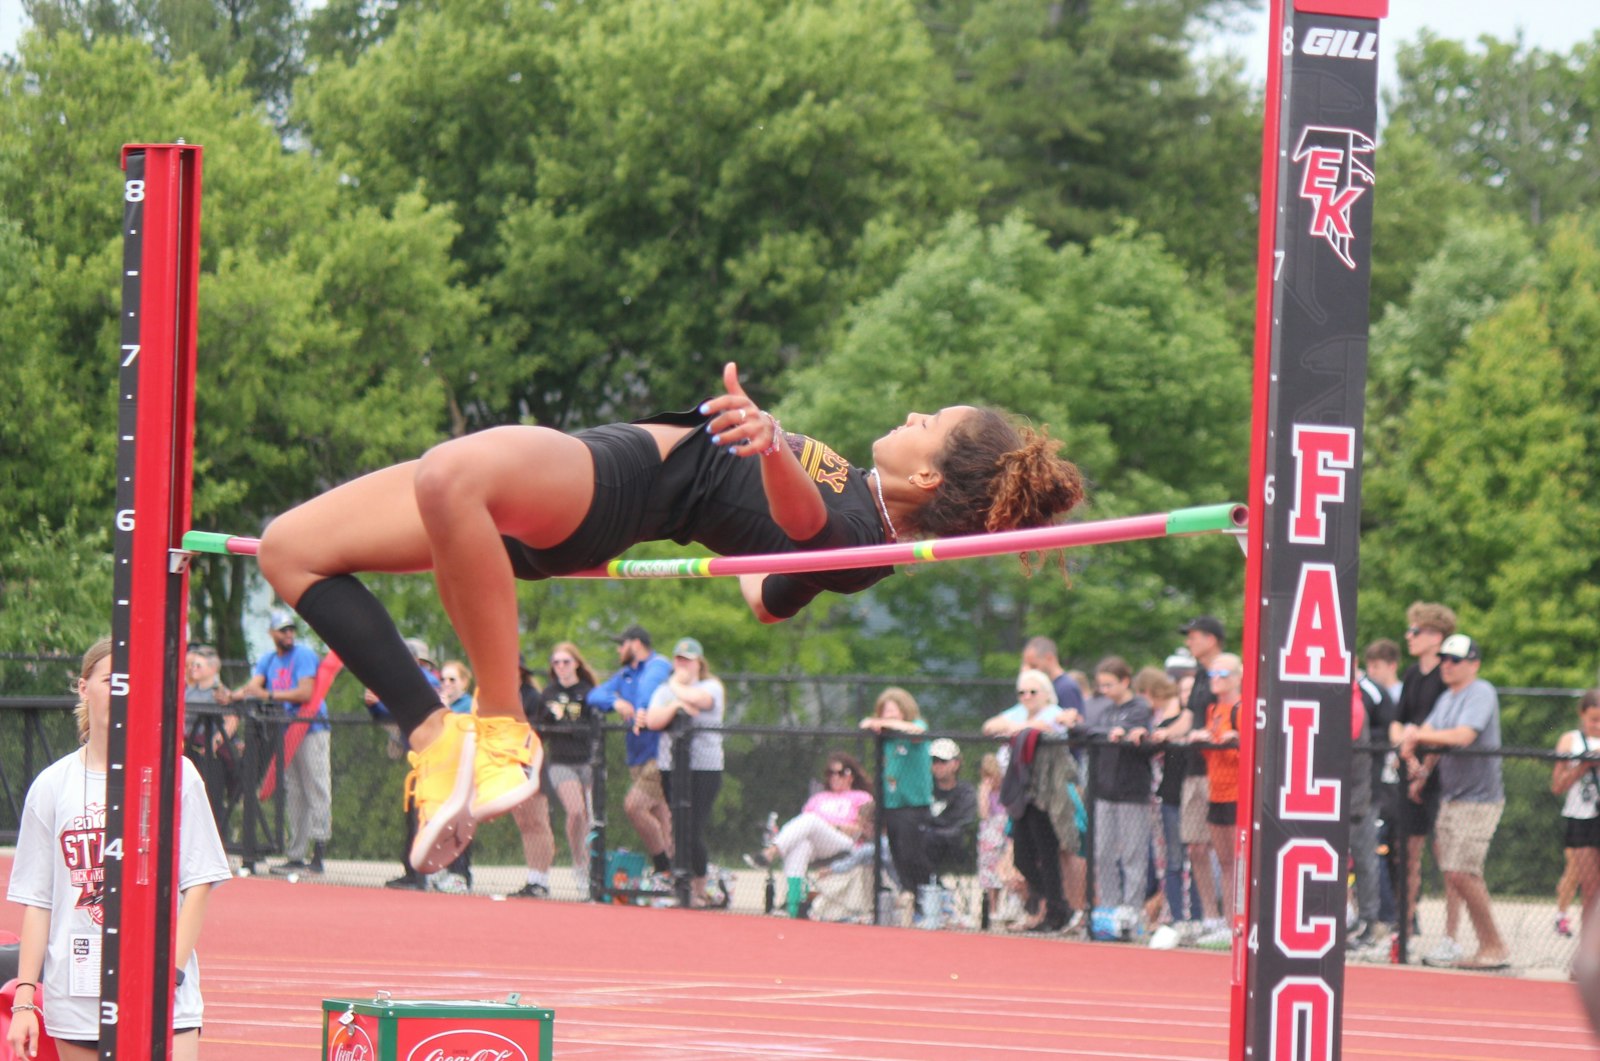 Farmington Hills Mercy senior Milena Chevallier pursues the Division 1 high jump state title by attempting 5 feet, 10 inches. She fell just short, finishing in second place behind Plymouth Salem’s Madison Morson, who cleared that height. (Wright Wilson | Special to Detroit Catholic)